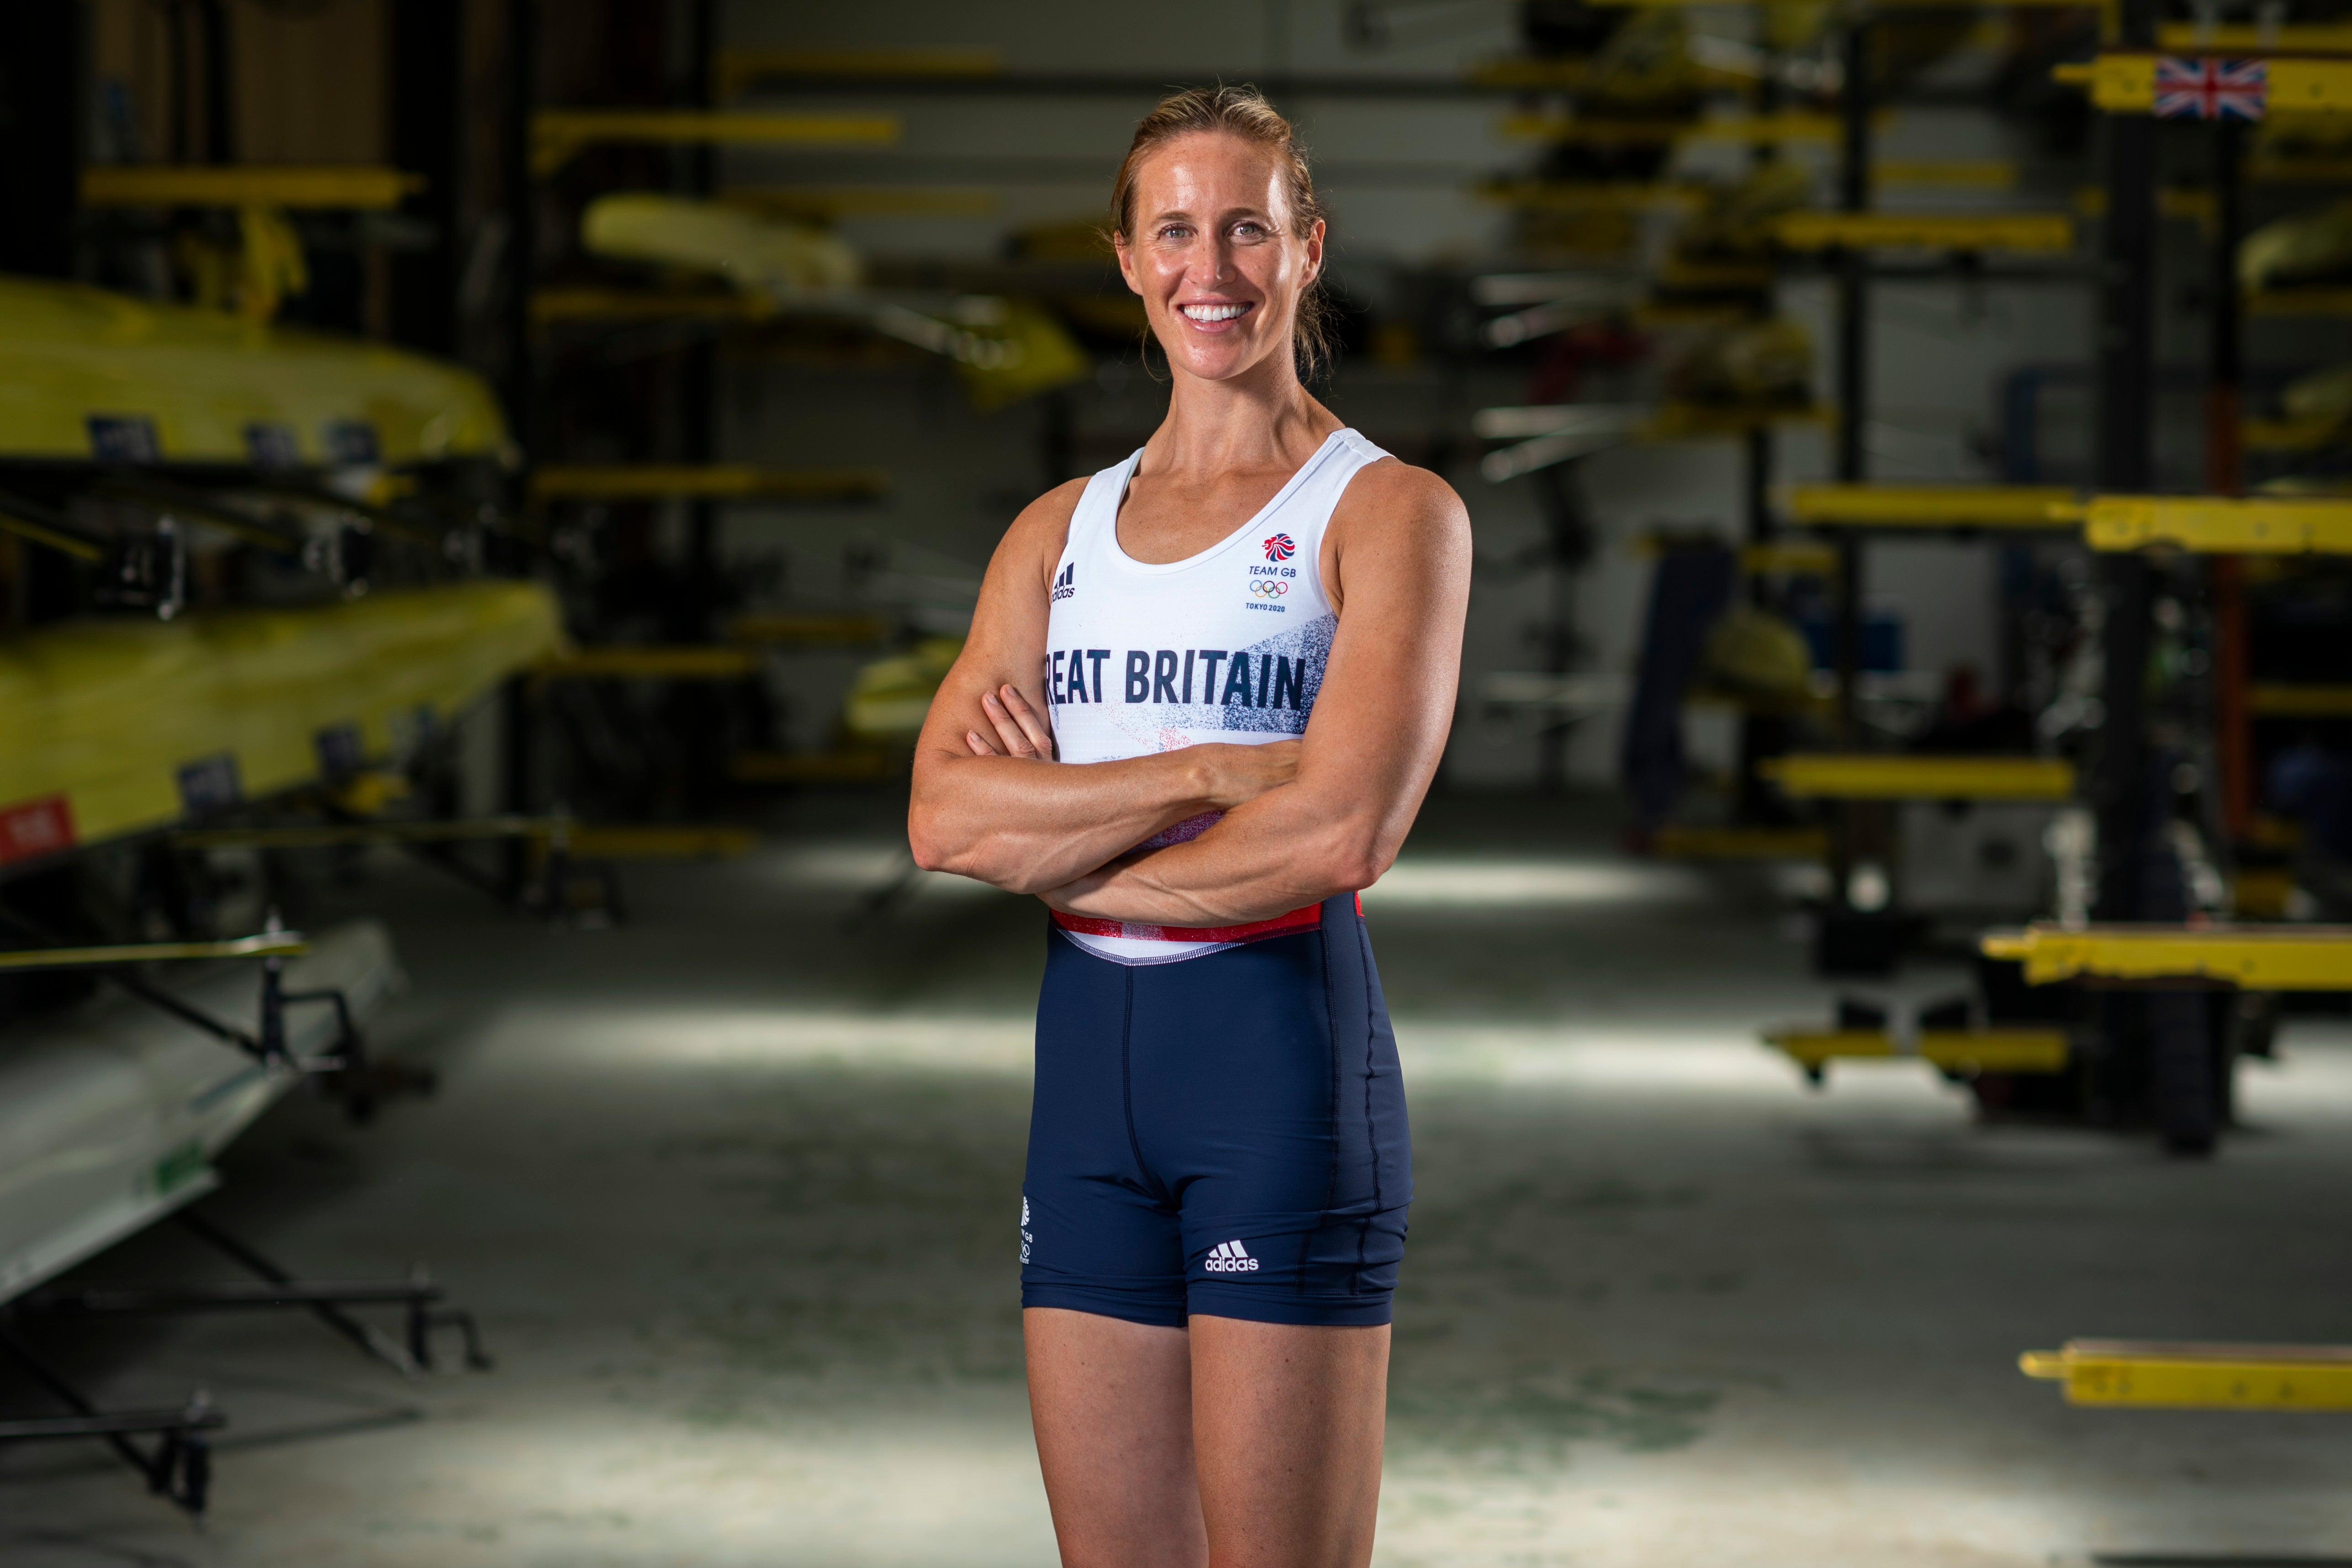 Helen Glover is aiming for a third consecutive Olympic gold